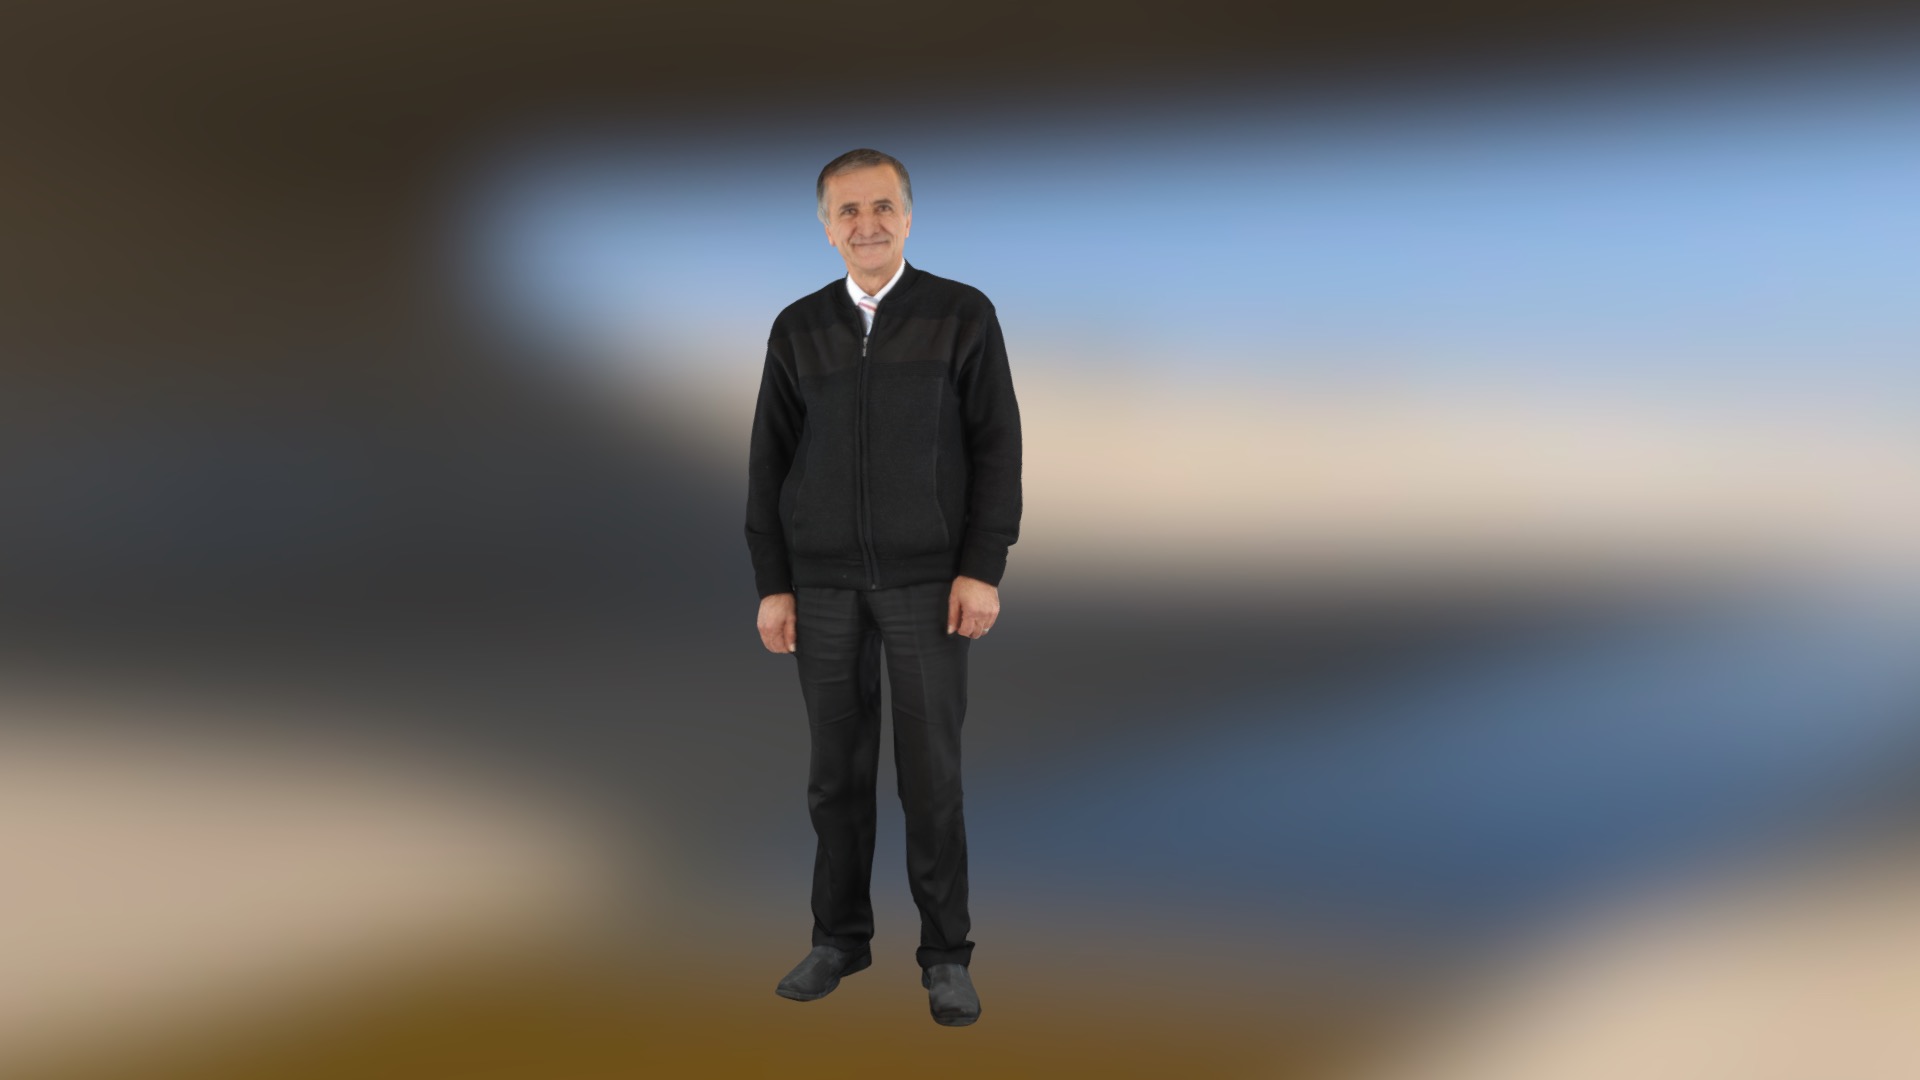 3D model Mr Standing - This is a 3D model of the Mr Standing. The 3D model is about a man in a suit.